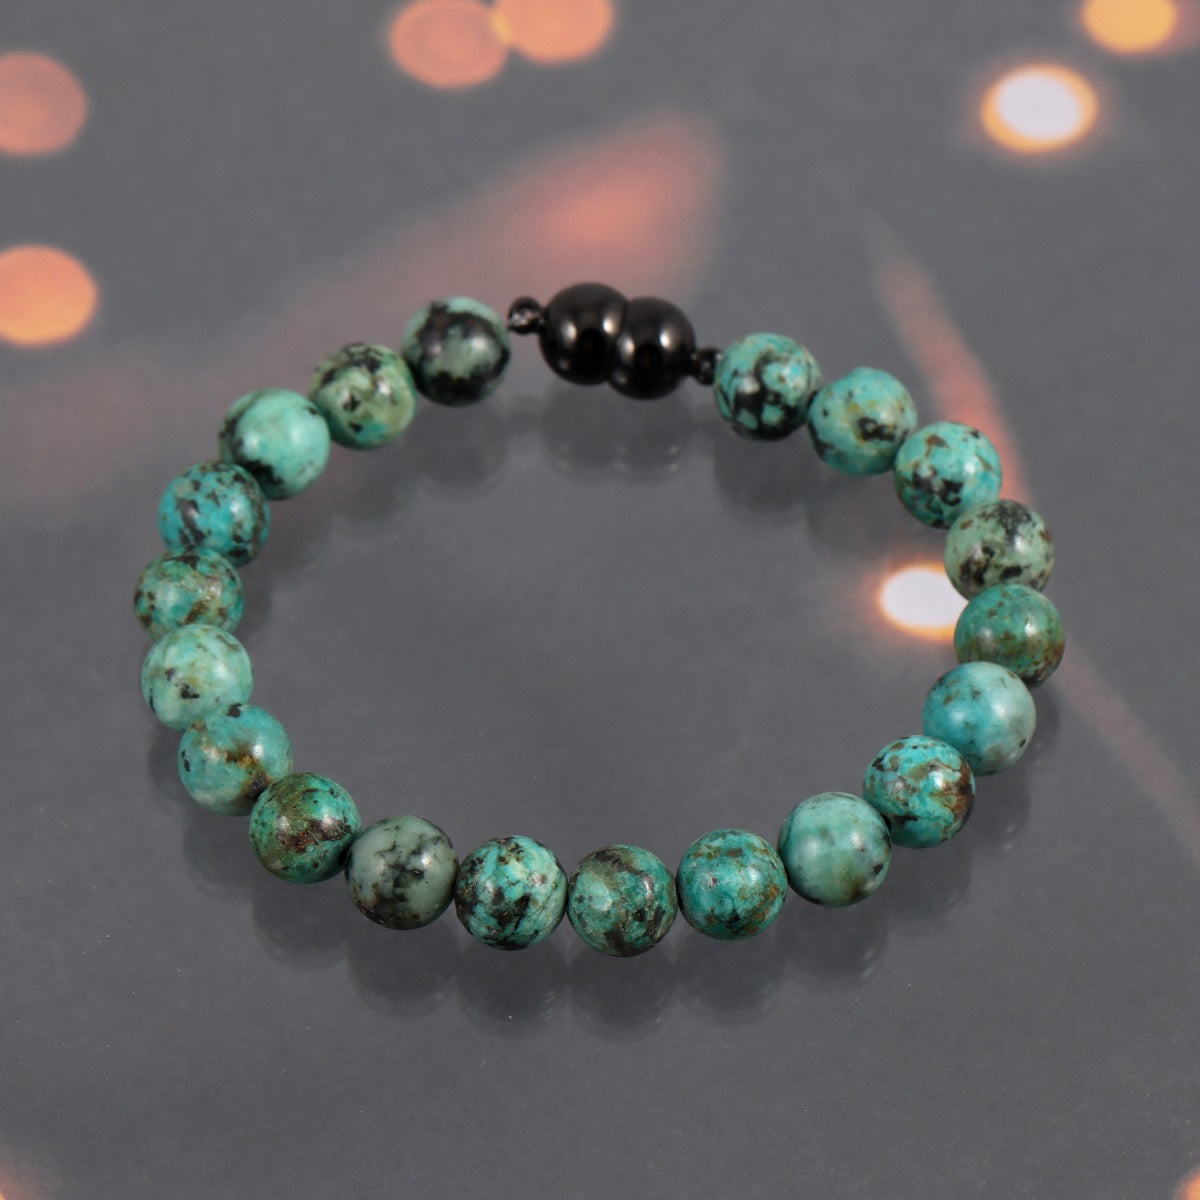 An image featuring the turquoise gemstones alongside keywords like healing, protection, and positive energy, symbolizing their metaphysical properties.